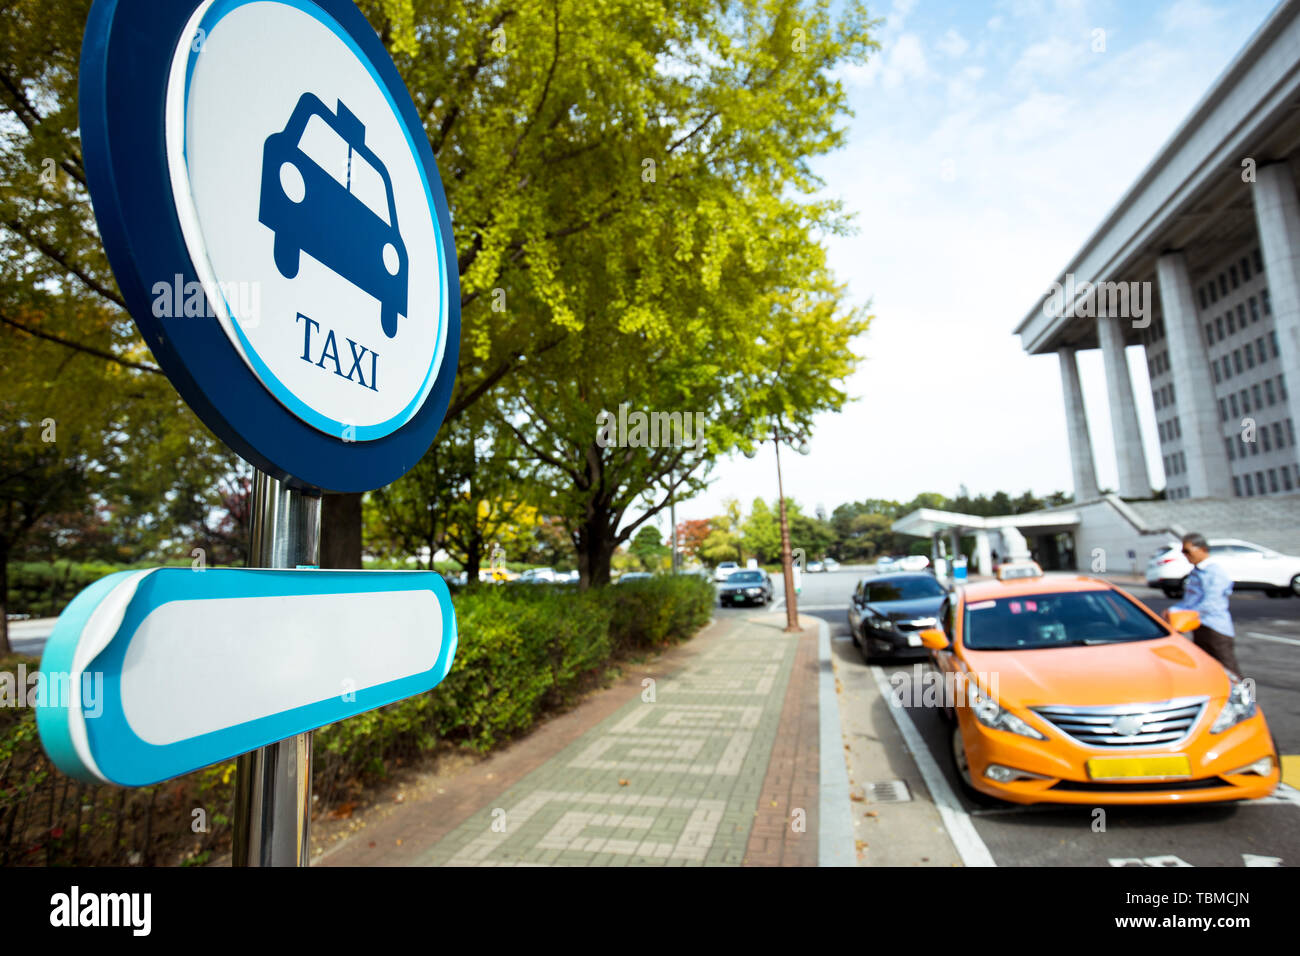 taxi sign on street in seoul Stock Photo